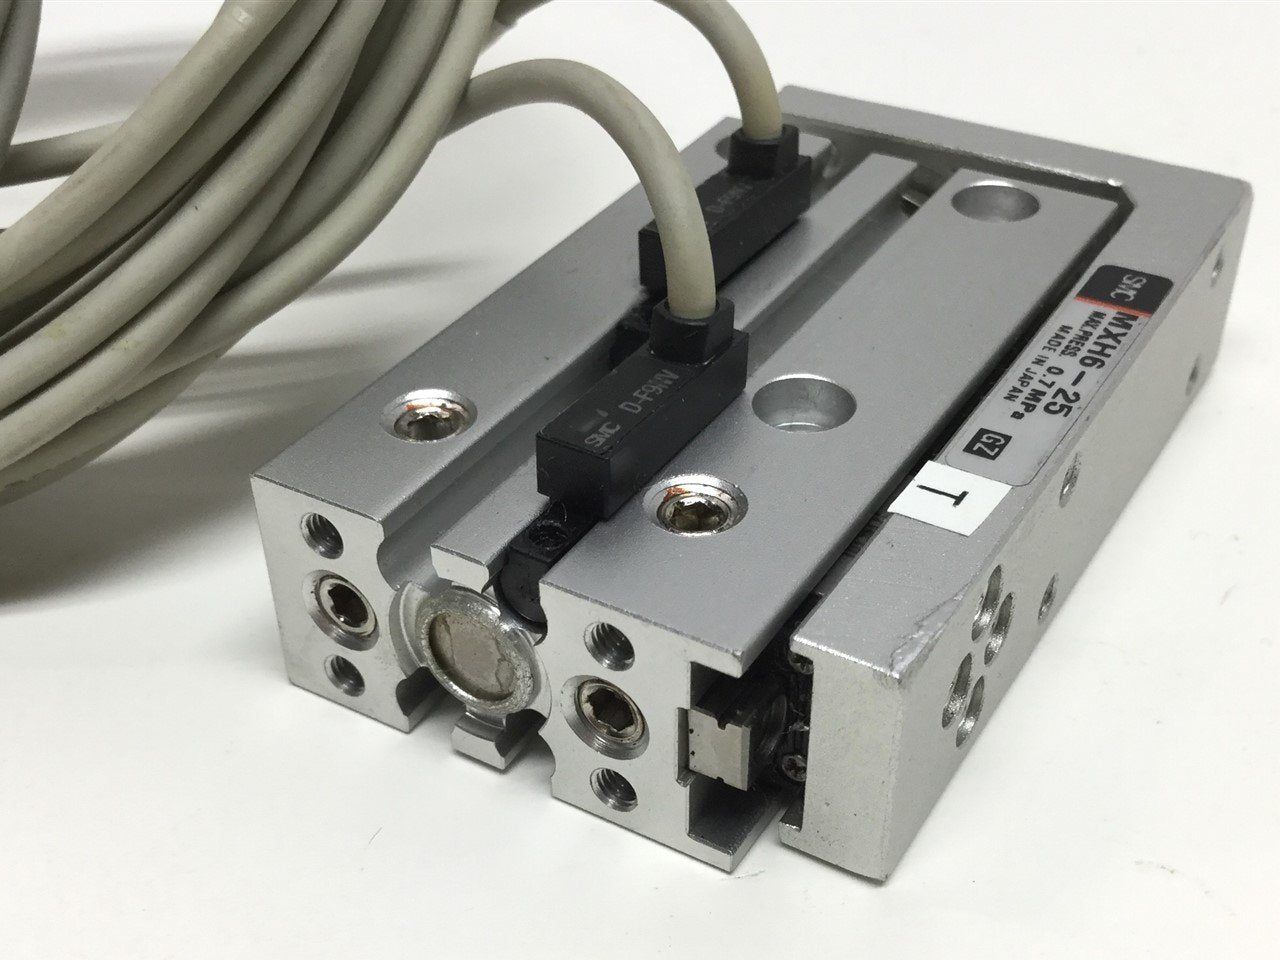 Used SMC MXH6-25 Compact Cylinder Linear Guide Slide Table, Bore: 6mm, Stroke: 25mm